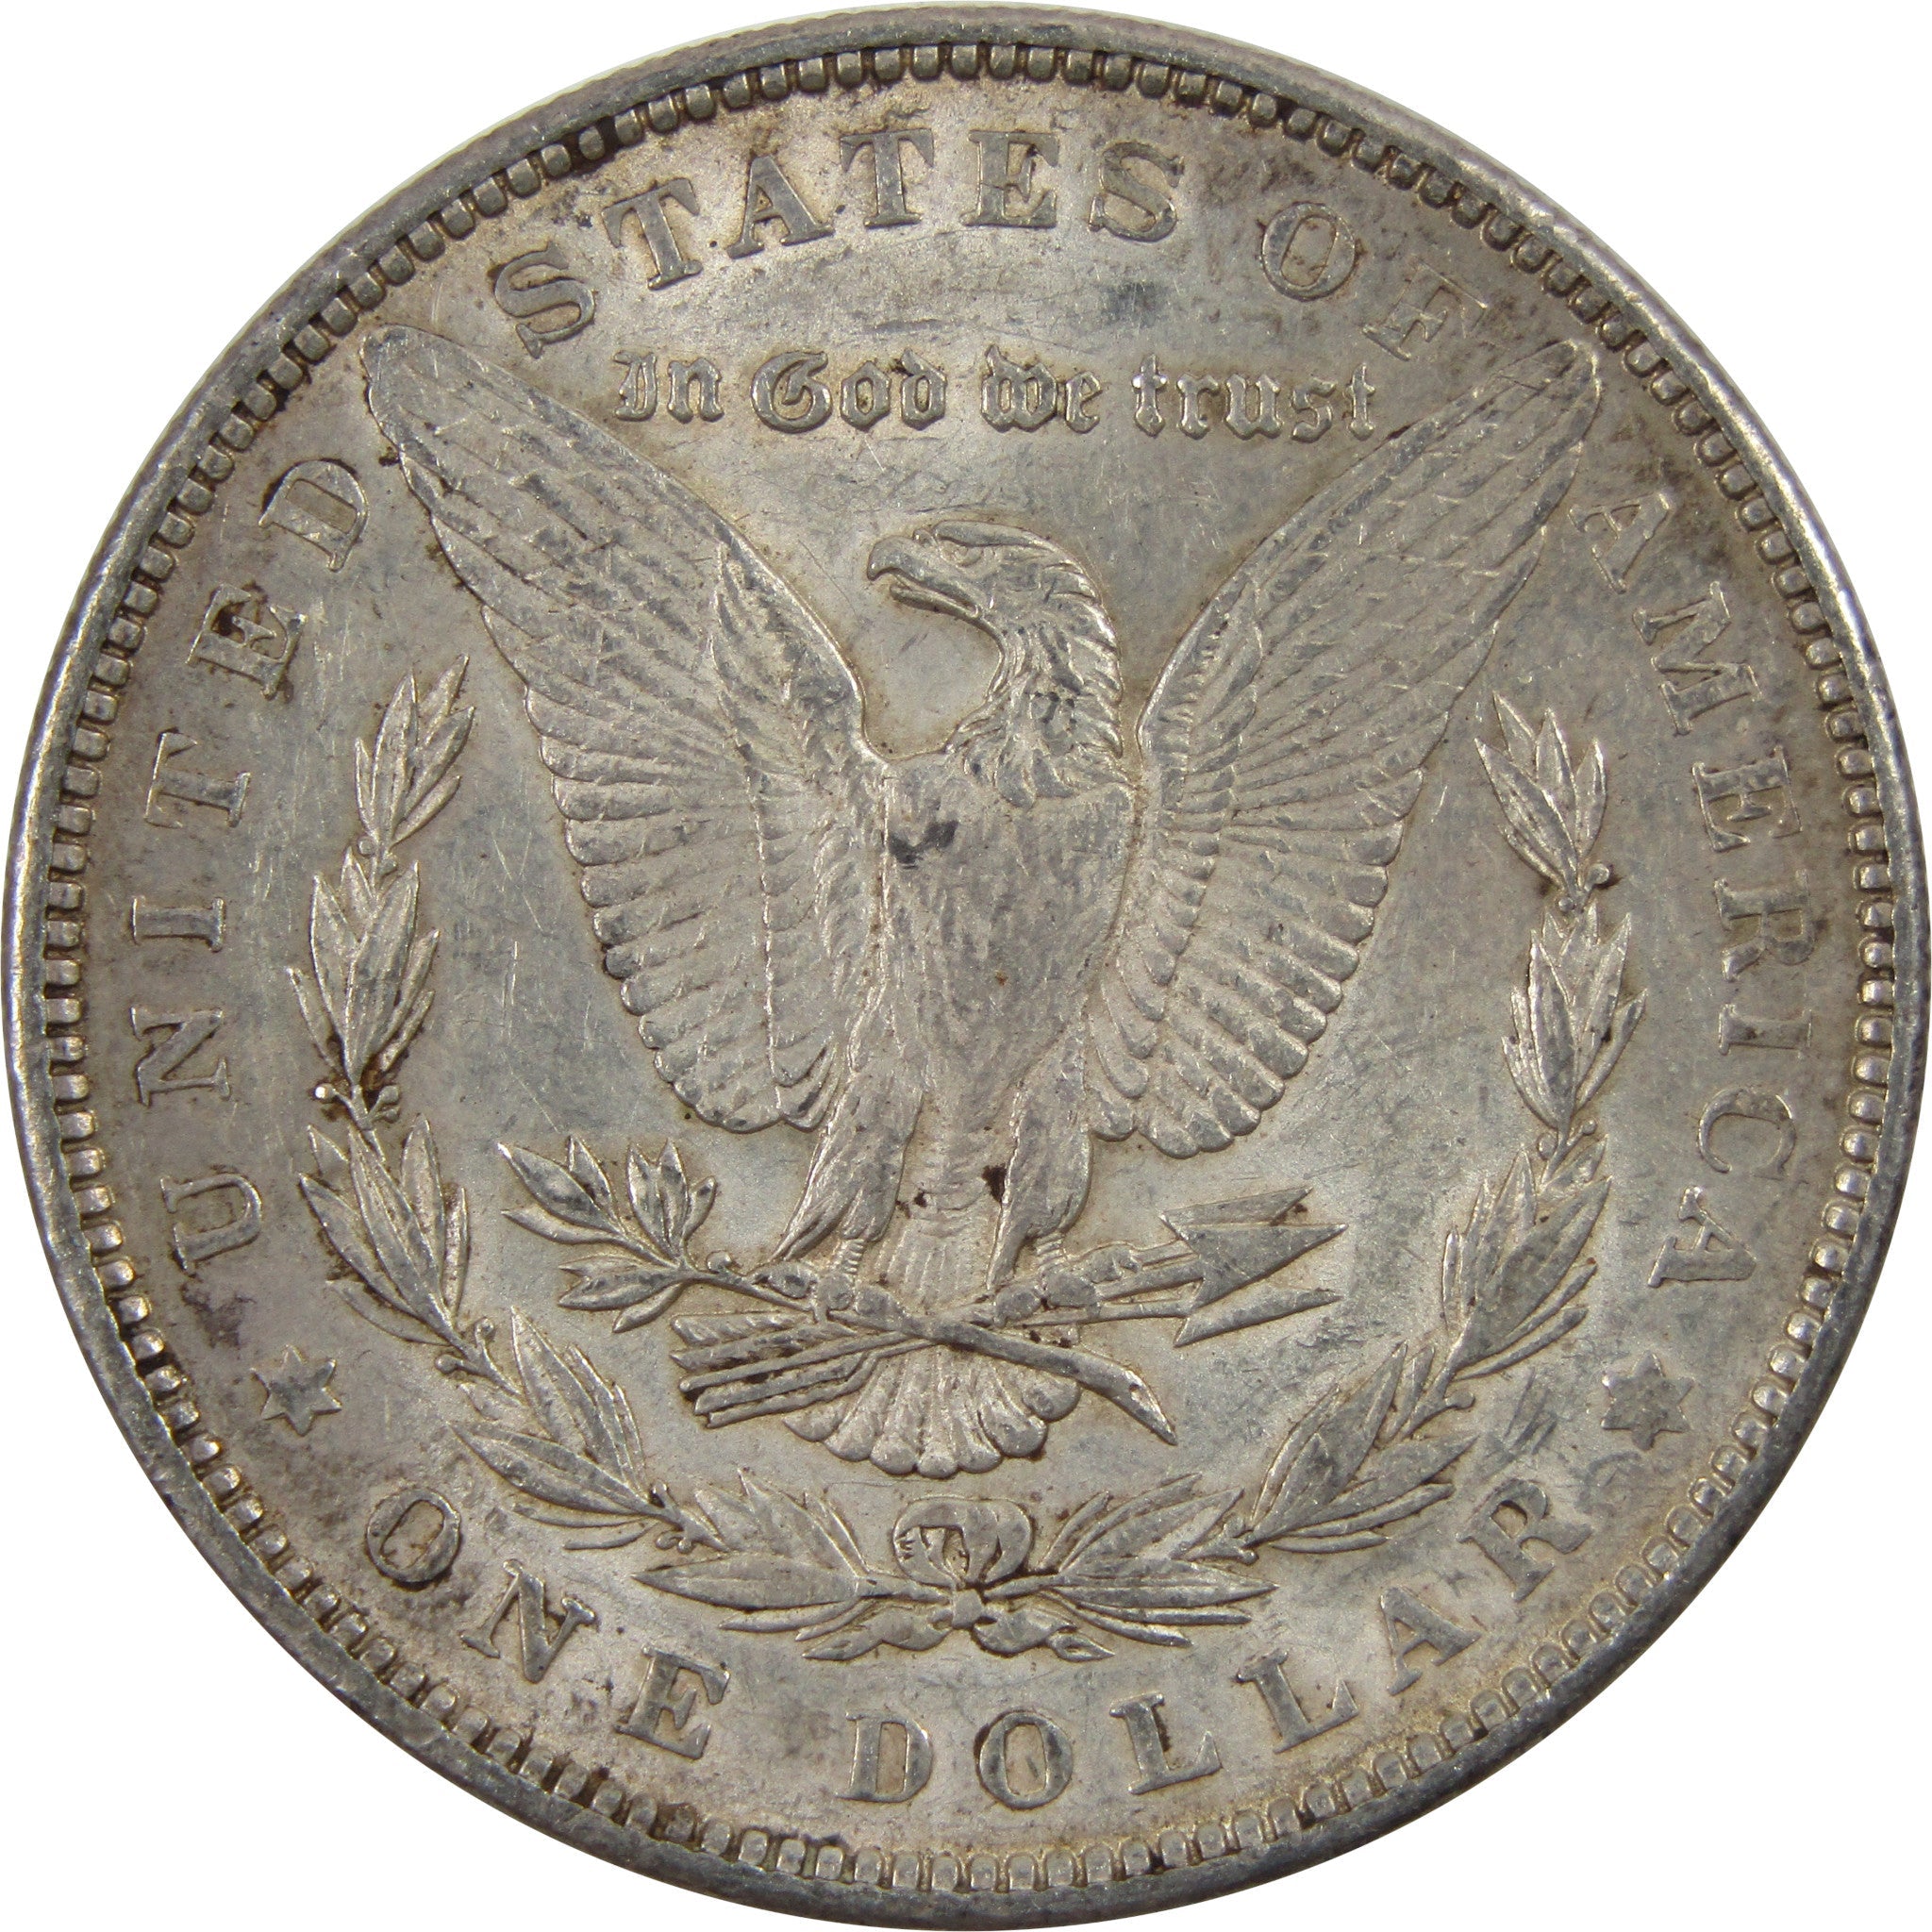 1890 Morgan Dollar AU About Uncirculated 90% Silver $1 Coin SKU:I5463 - Morgan coin - Morgan silver dollar - Morgan silver dollar for sale - Profile Coins &amp; Collectibles